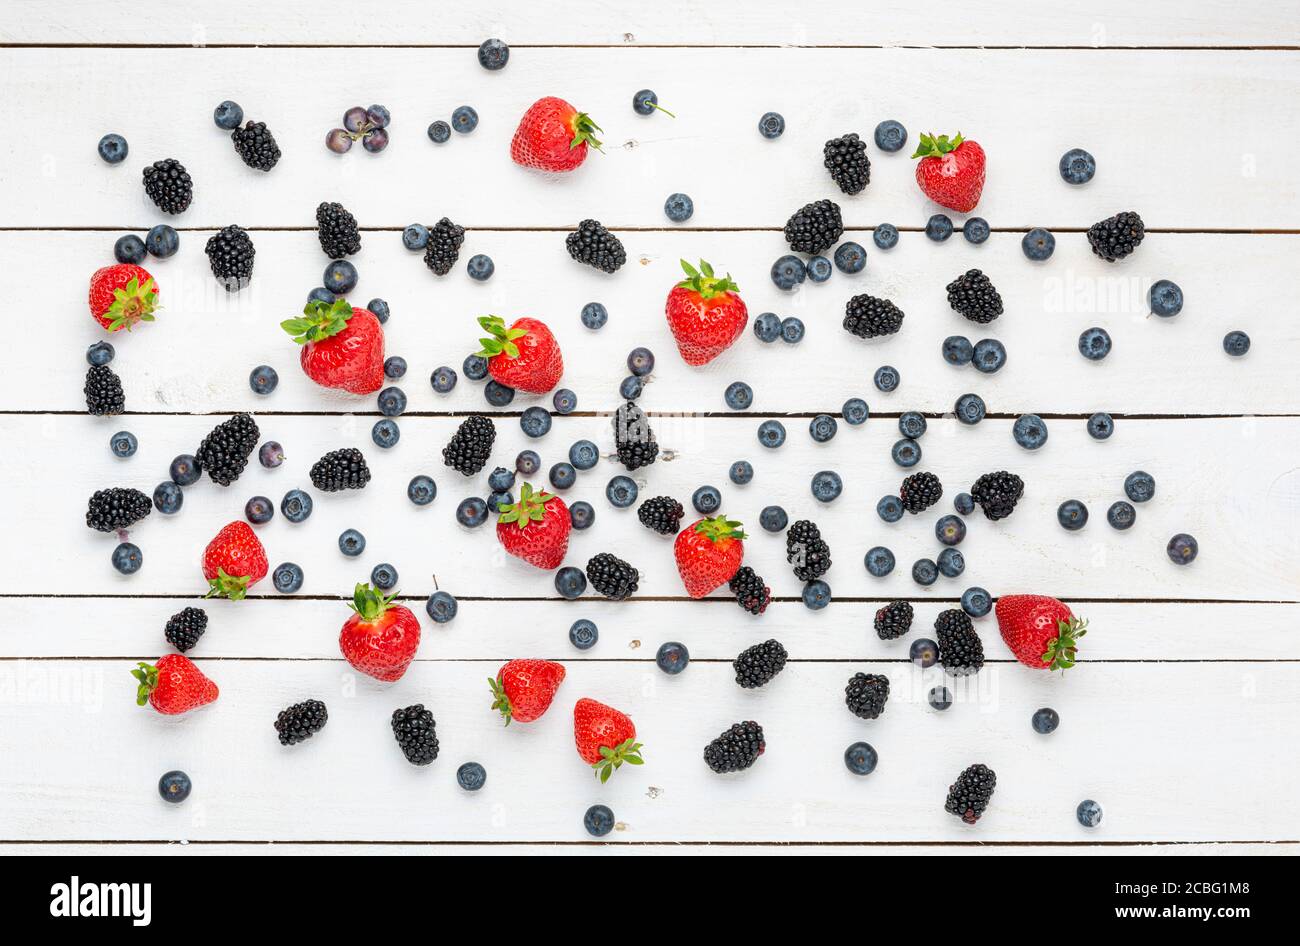 Strawberries, Blueberries and Blackberries on white wooden boards. Stock Photo